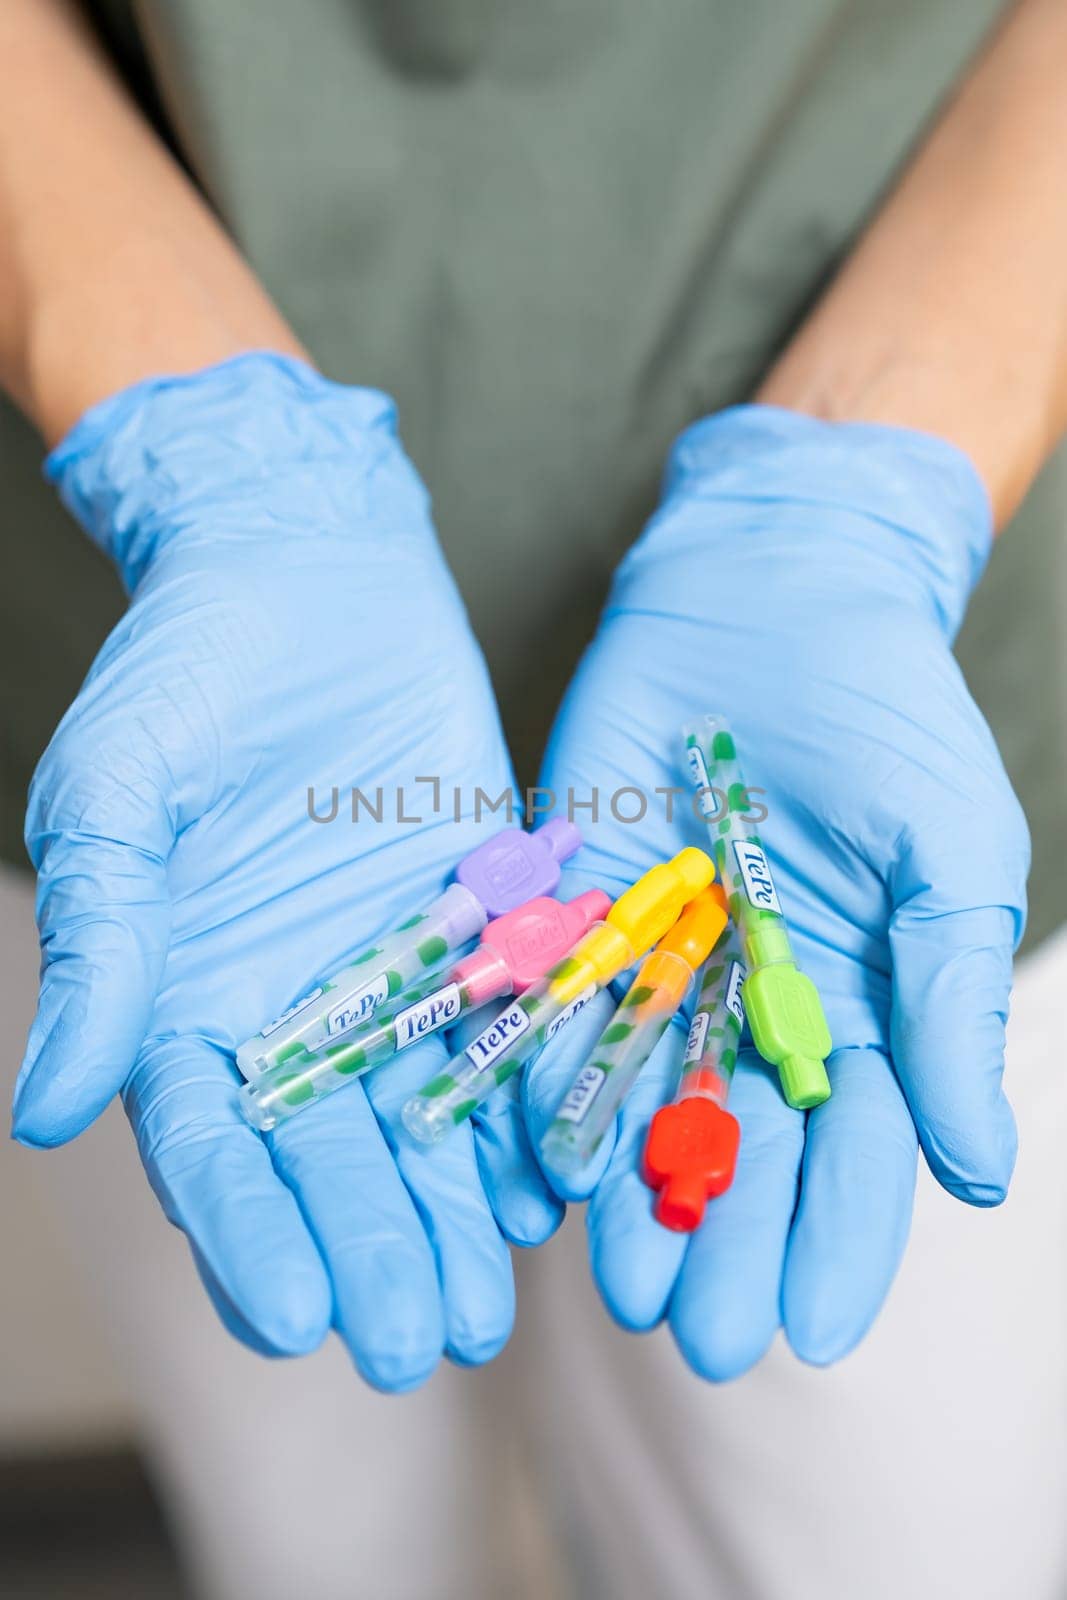 Interdental Toothbrushes in dentists hands in rubber gloves by vladimka